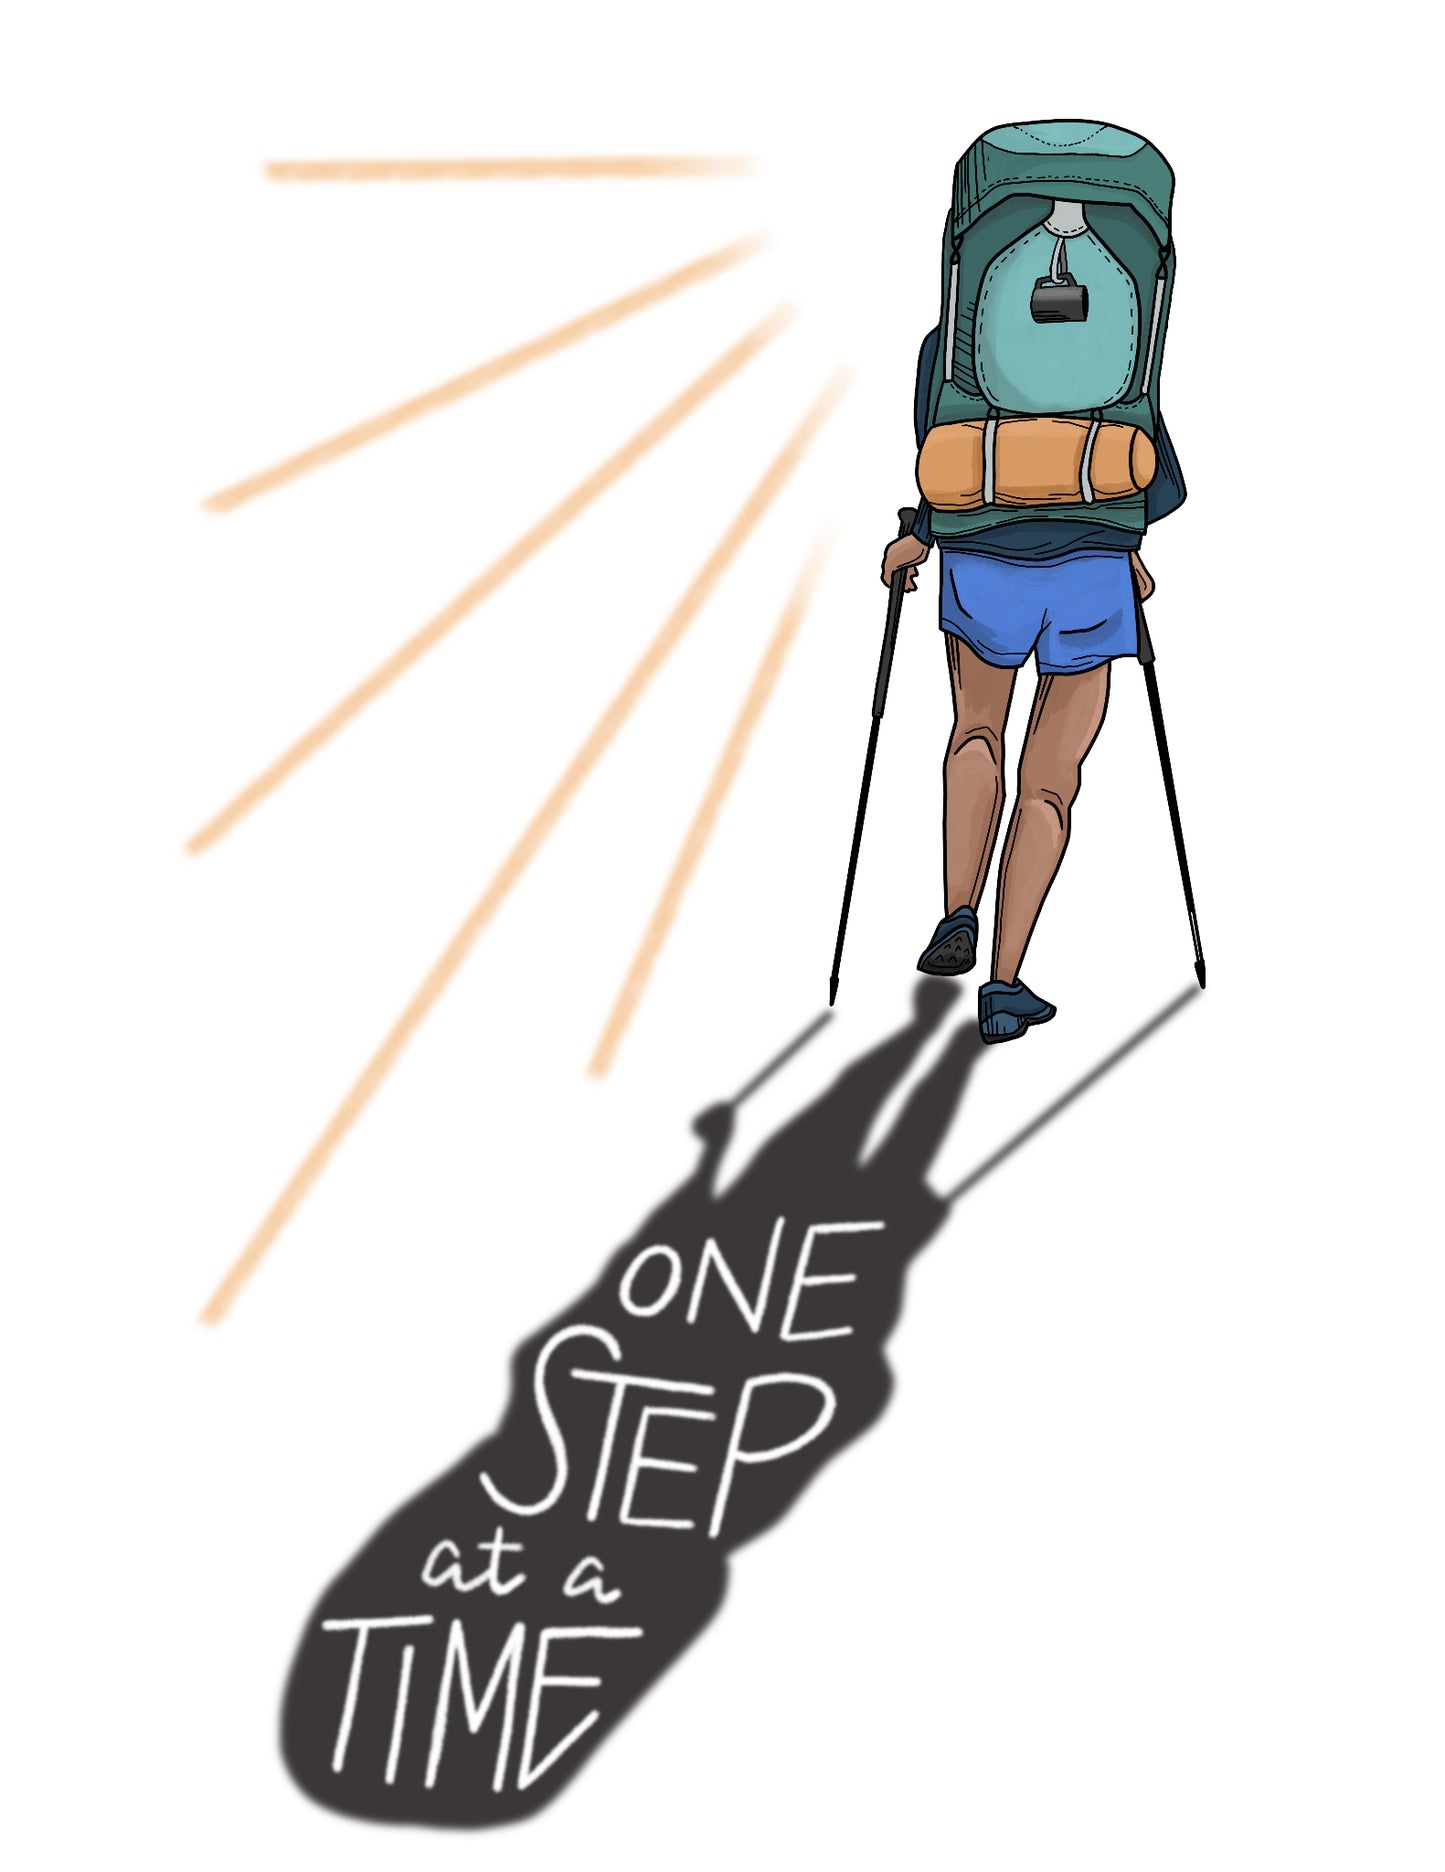 One Step at a Time sticker